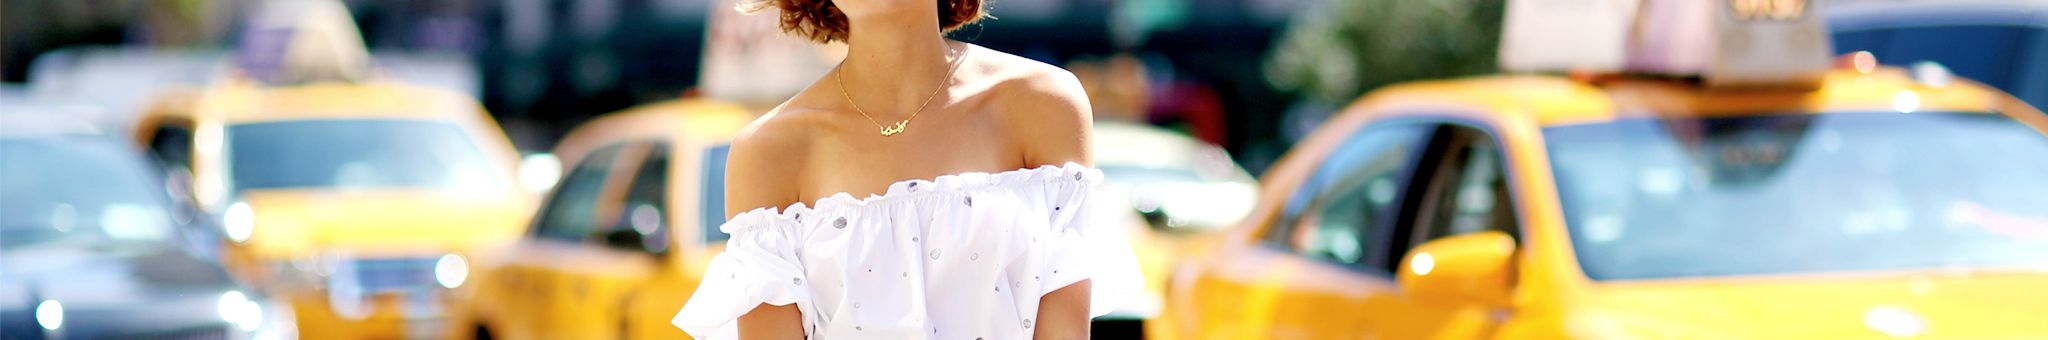 TRENDS TO TRY THIS SUMMER 15/16